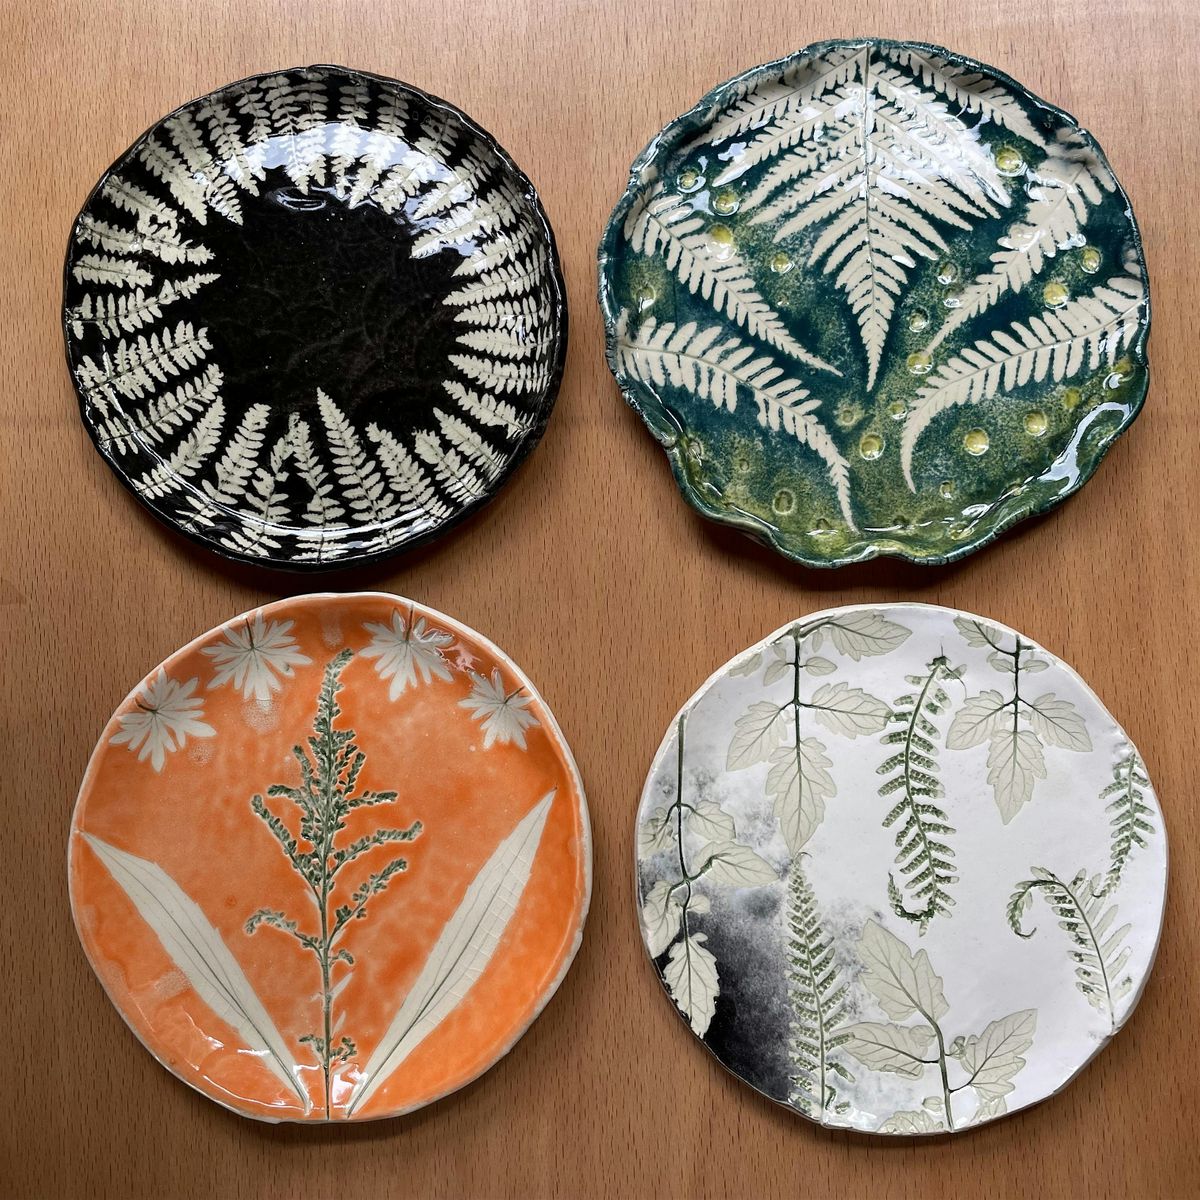 Botanical Clay Dish Making, Windsor Great Park, Saturday 24 August